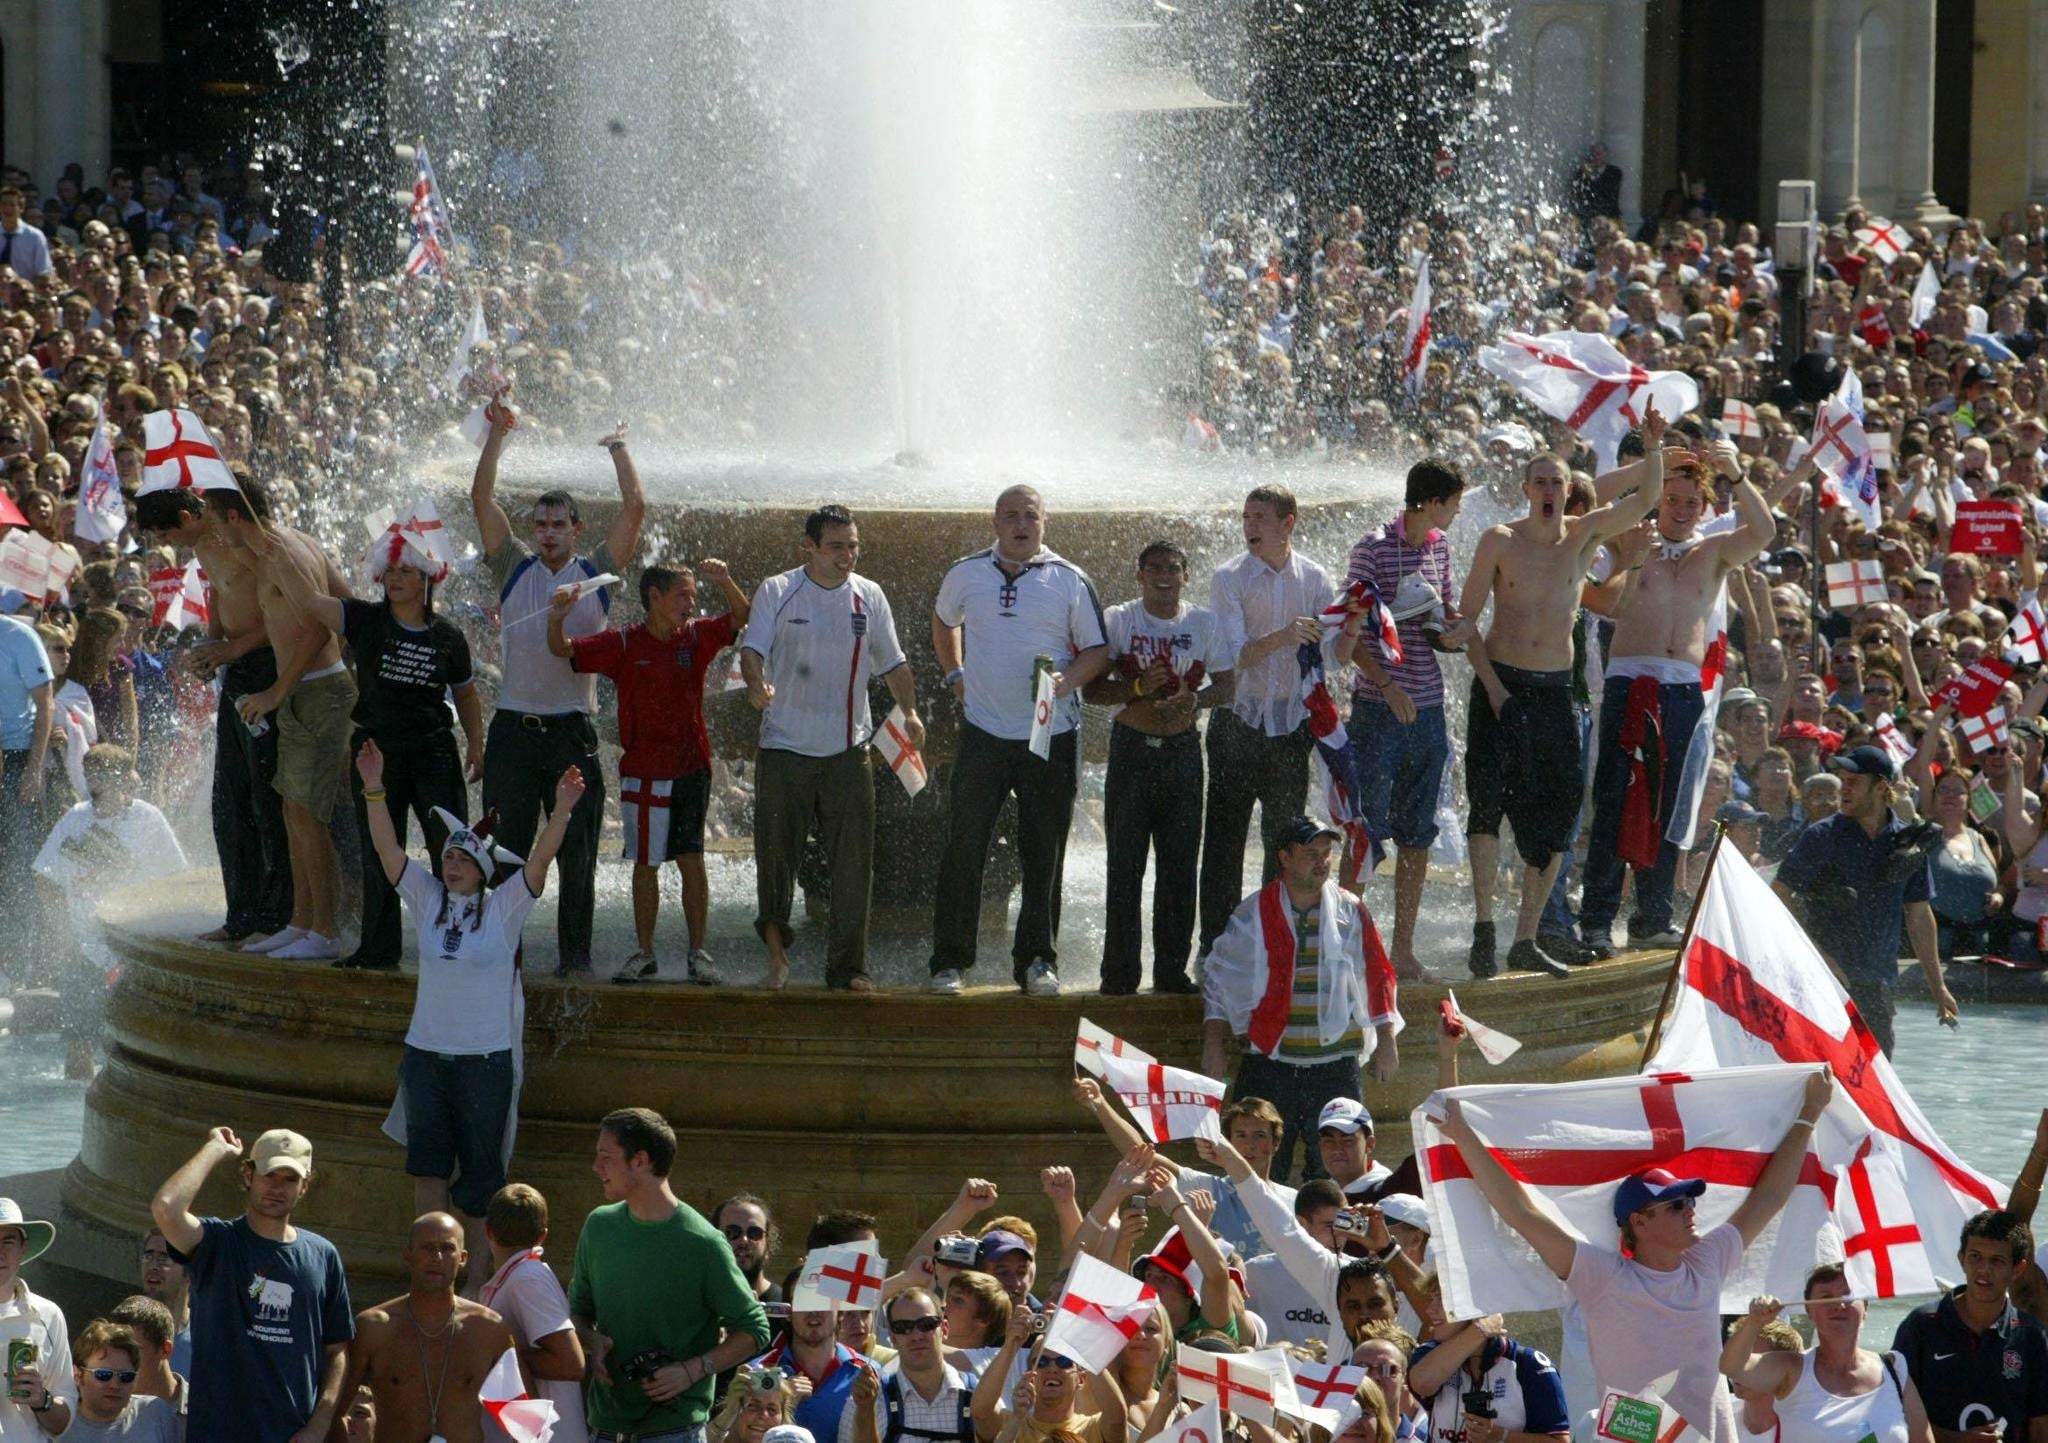 England were given a rousing reception at Trafalgar Square after sealing their Ashes win (Gareth Copley/PA)